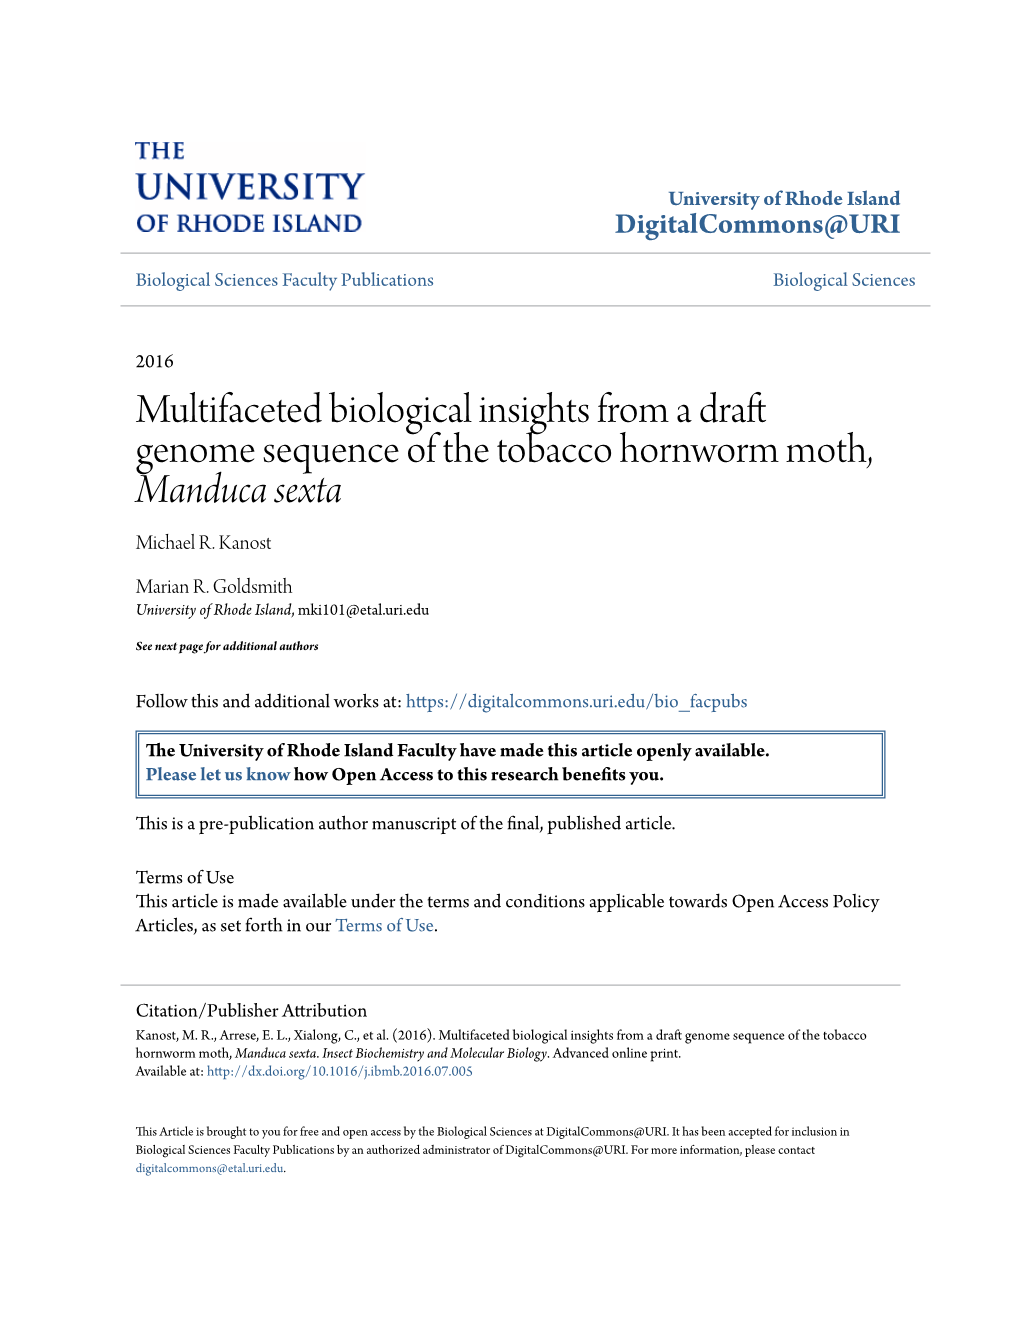 Multifaceted Biological Insights from a Draft Genome Sequence of the Tobacco Hornworm Moth, Manduca Sexta Michael R